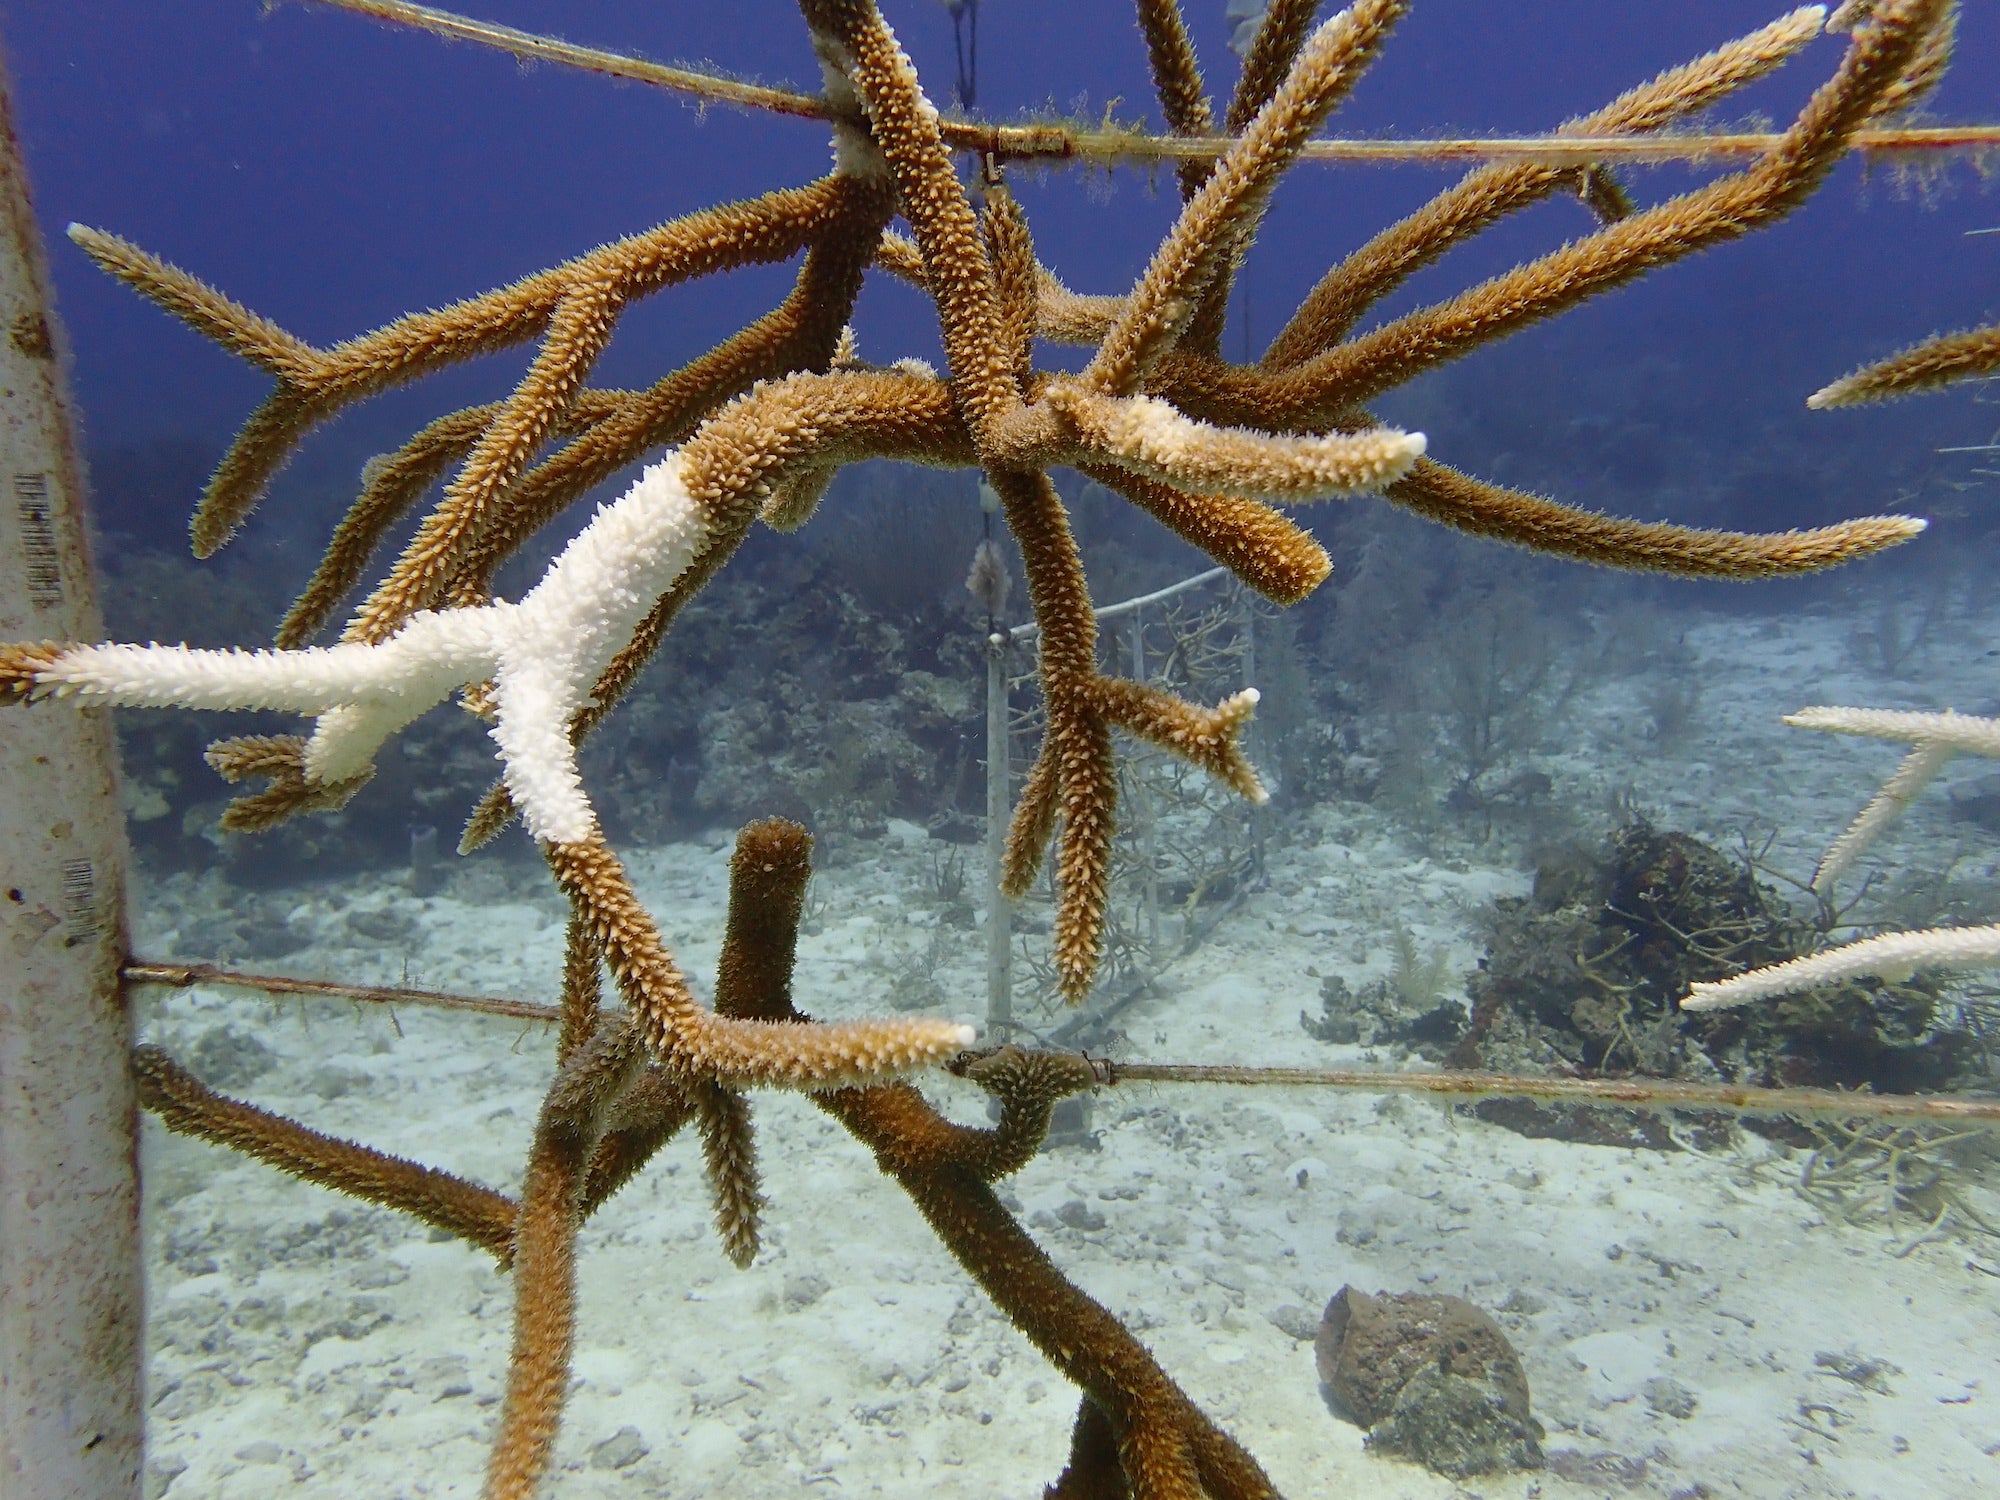 staghorn coral fragments in a Little Cayman reef